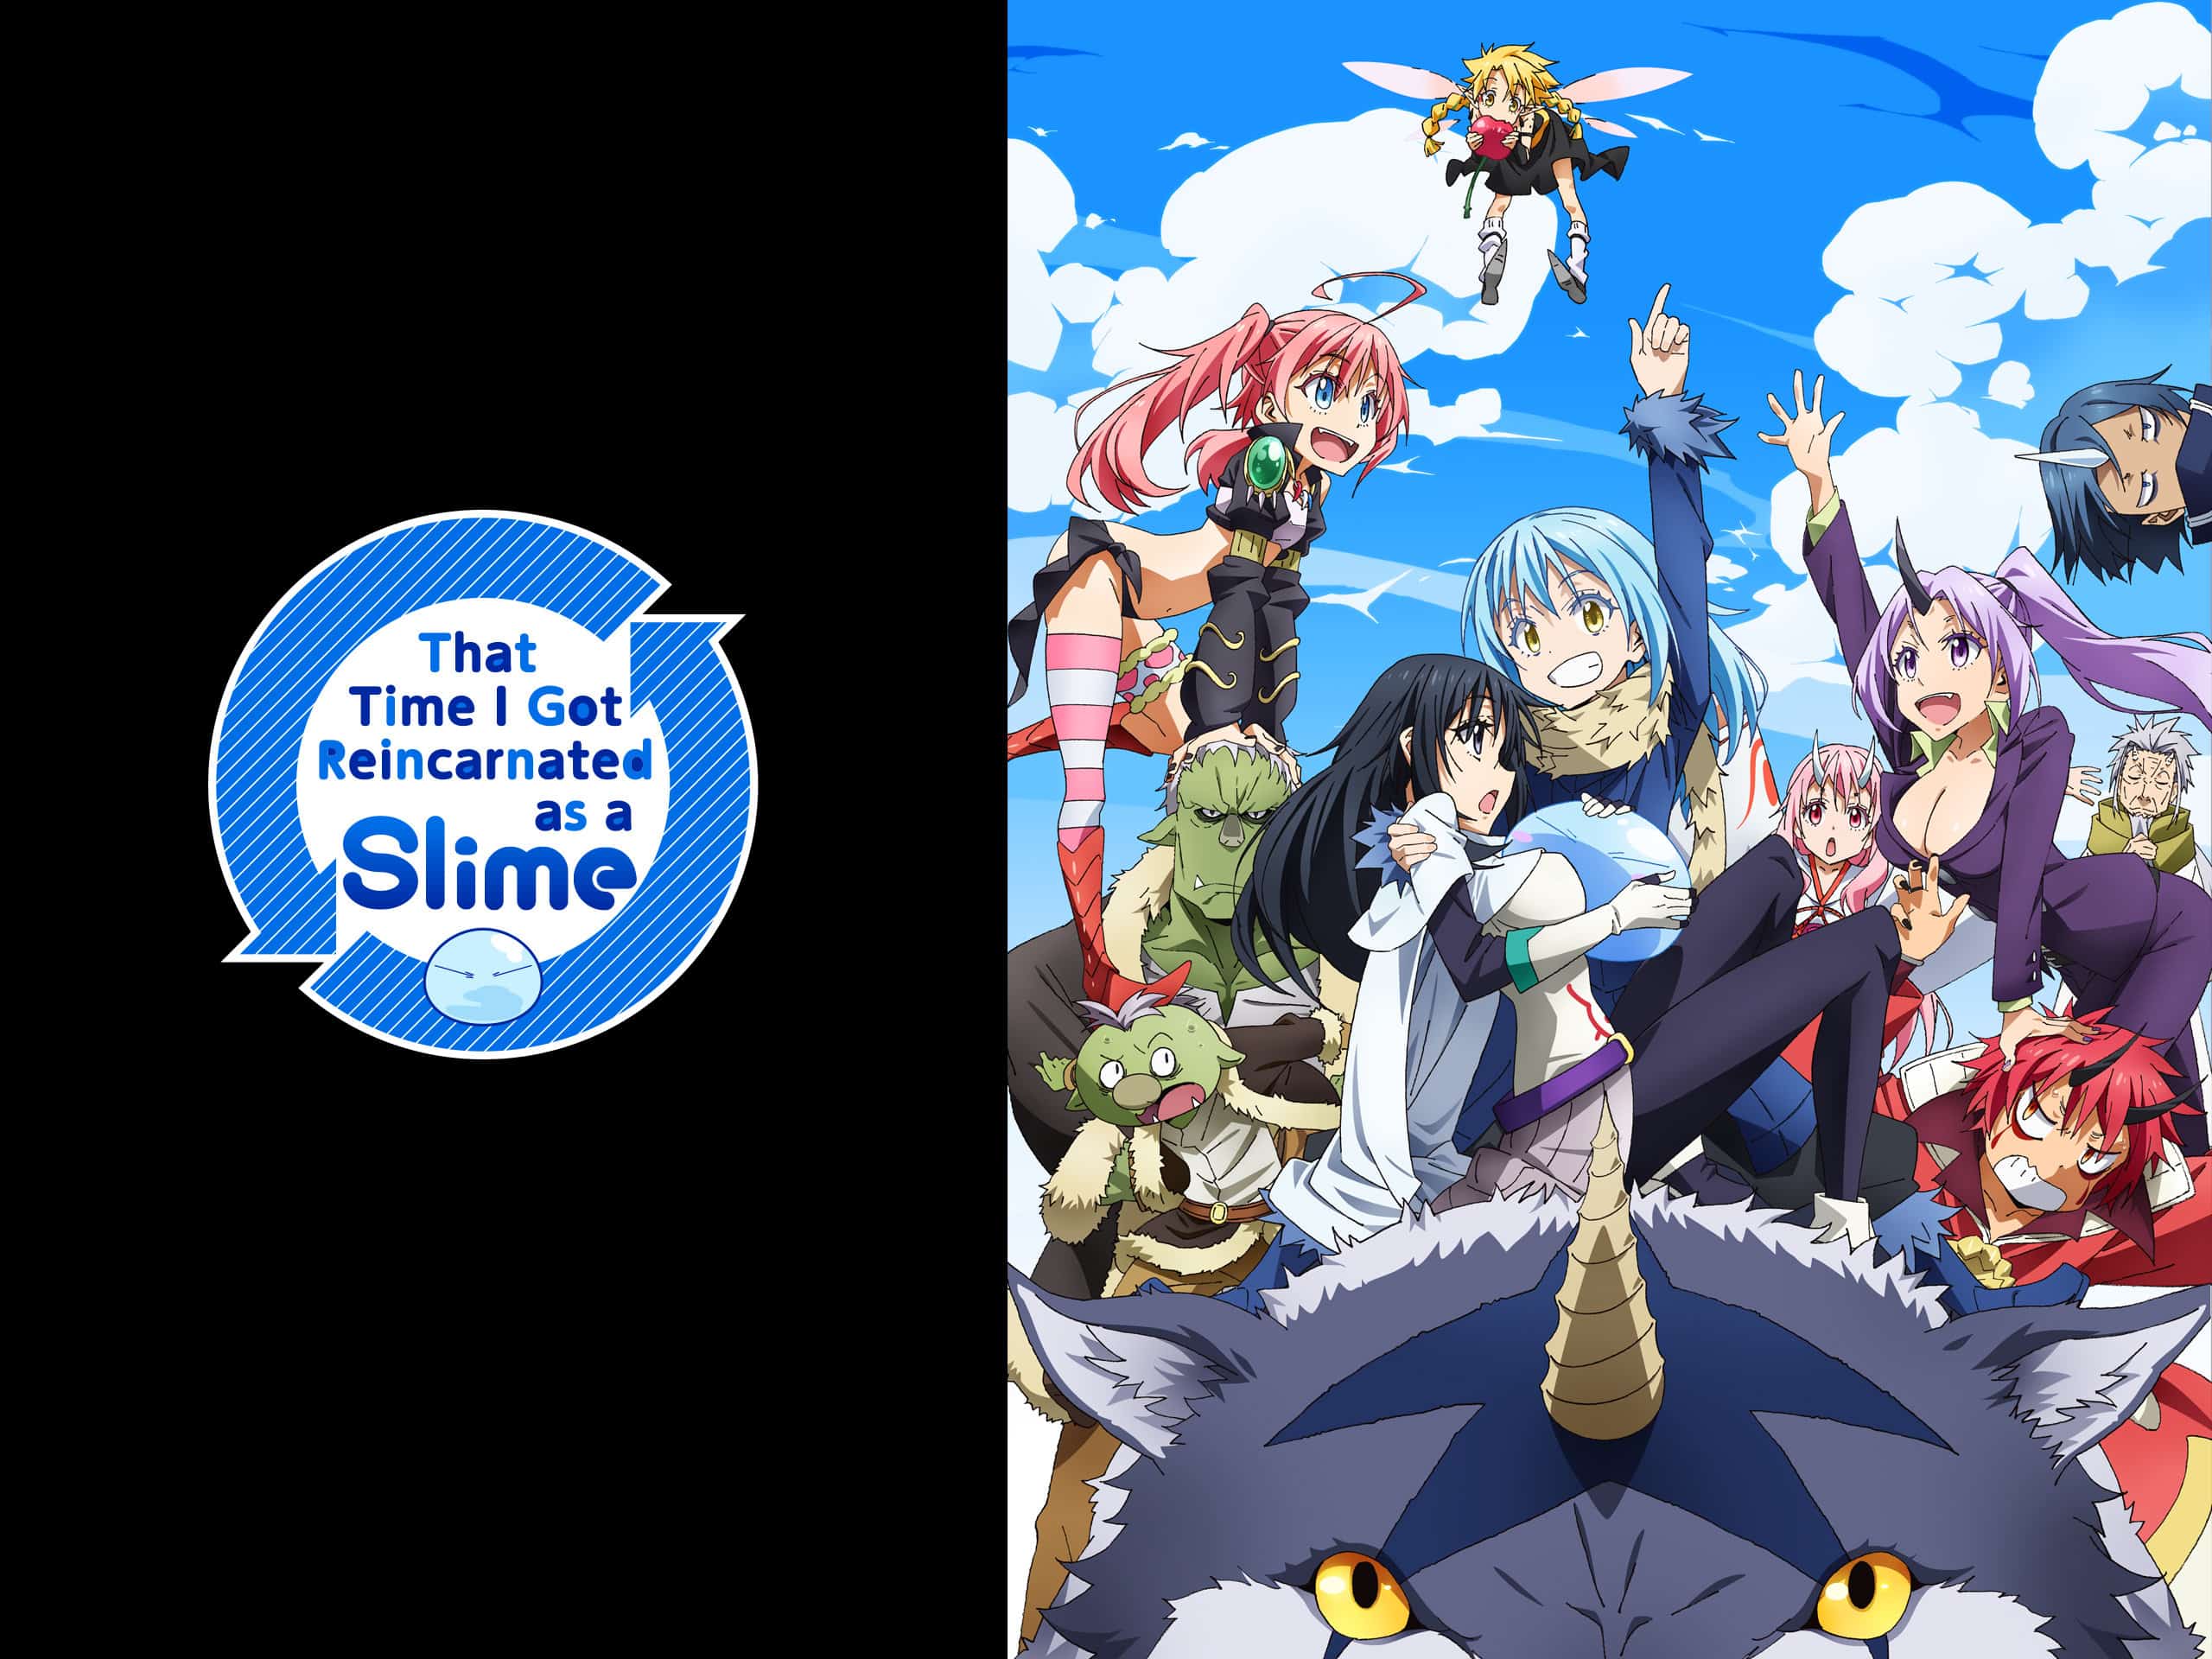 That Time, I Got Reincarnated as a Slime